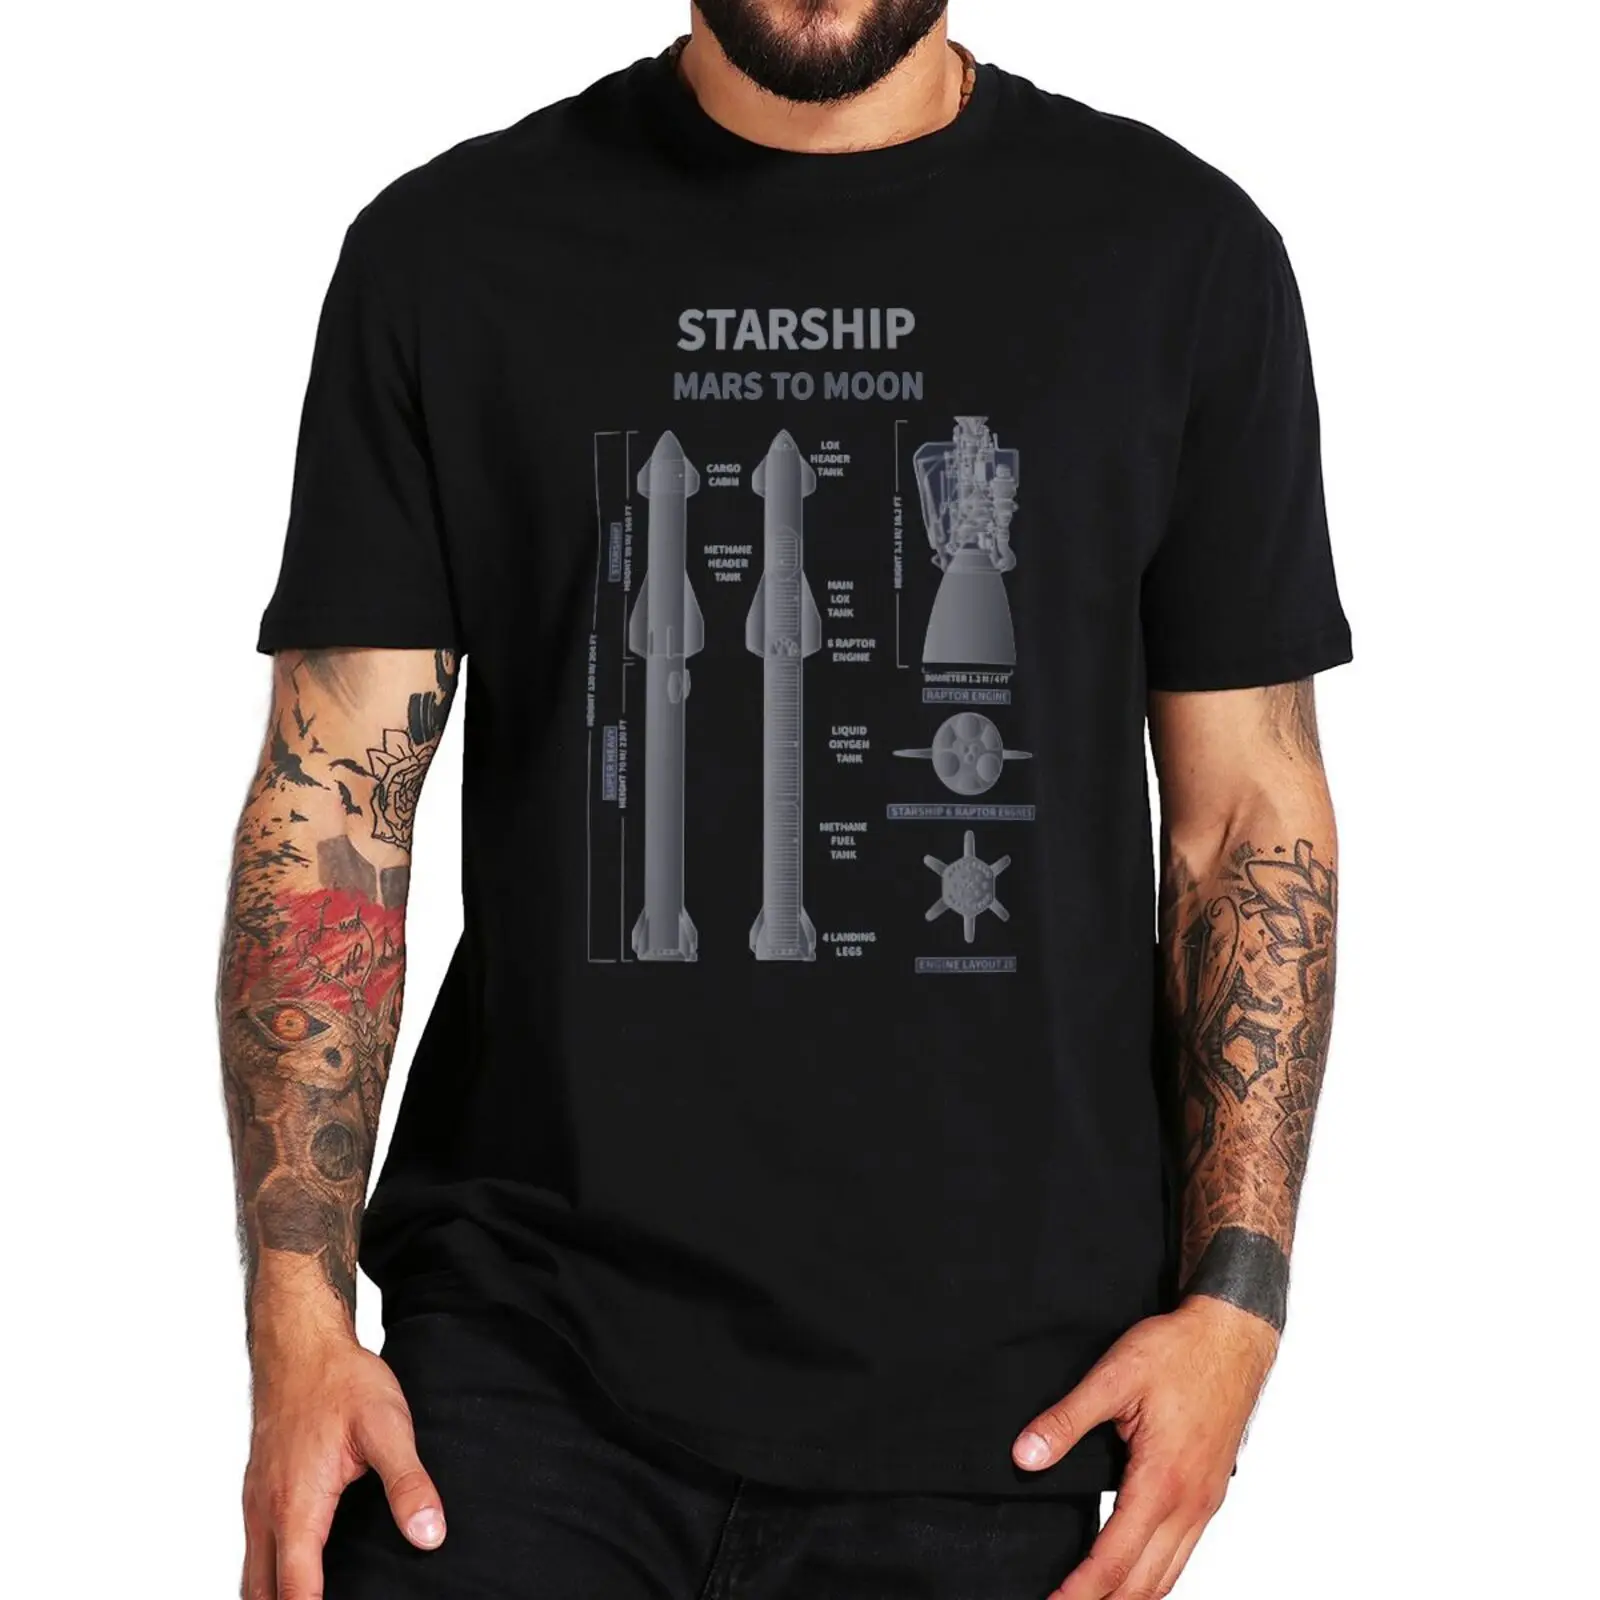 

Starship SN15 Mission To Mars Space Rocket Launch T Shirt Universe Science Fans Classic Tee Tops 100% Cotton Men's Tshirt